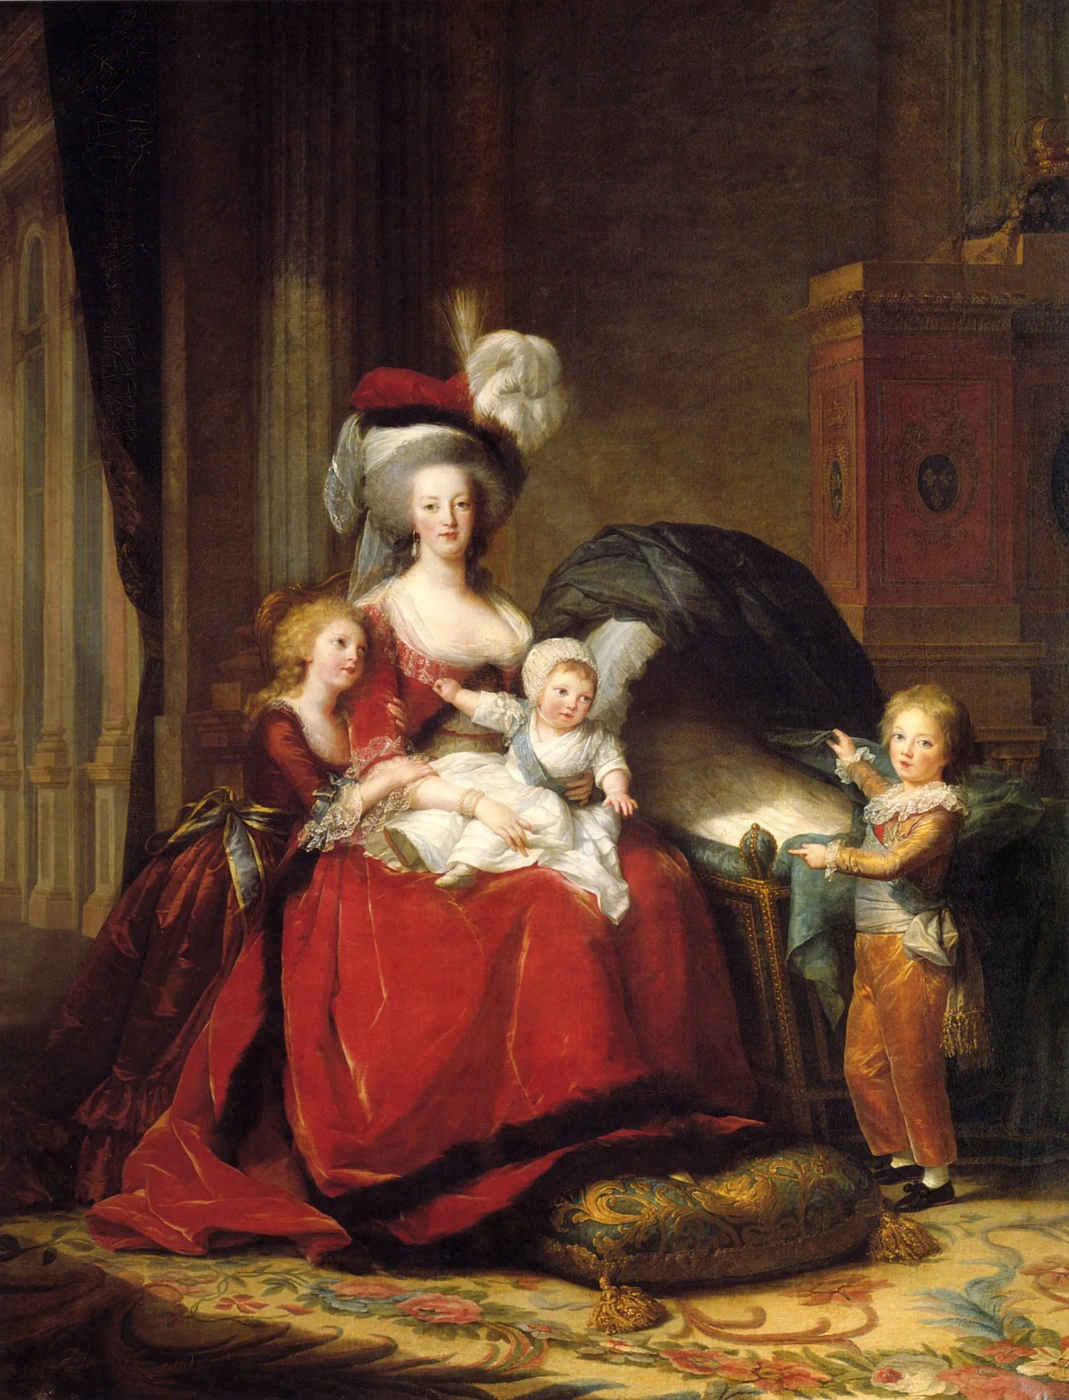 Rococo Women Beauty Guide. Elisabeth Vigee Lebrun, Portrait of Marie Antoinette with children, 1787, Palace of Versailles